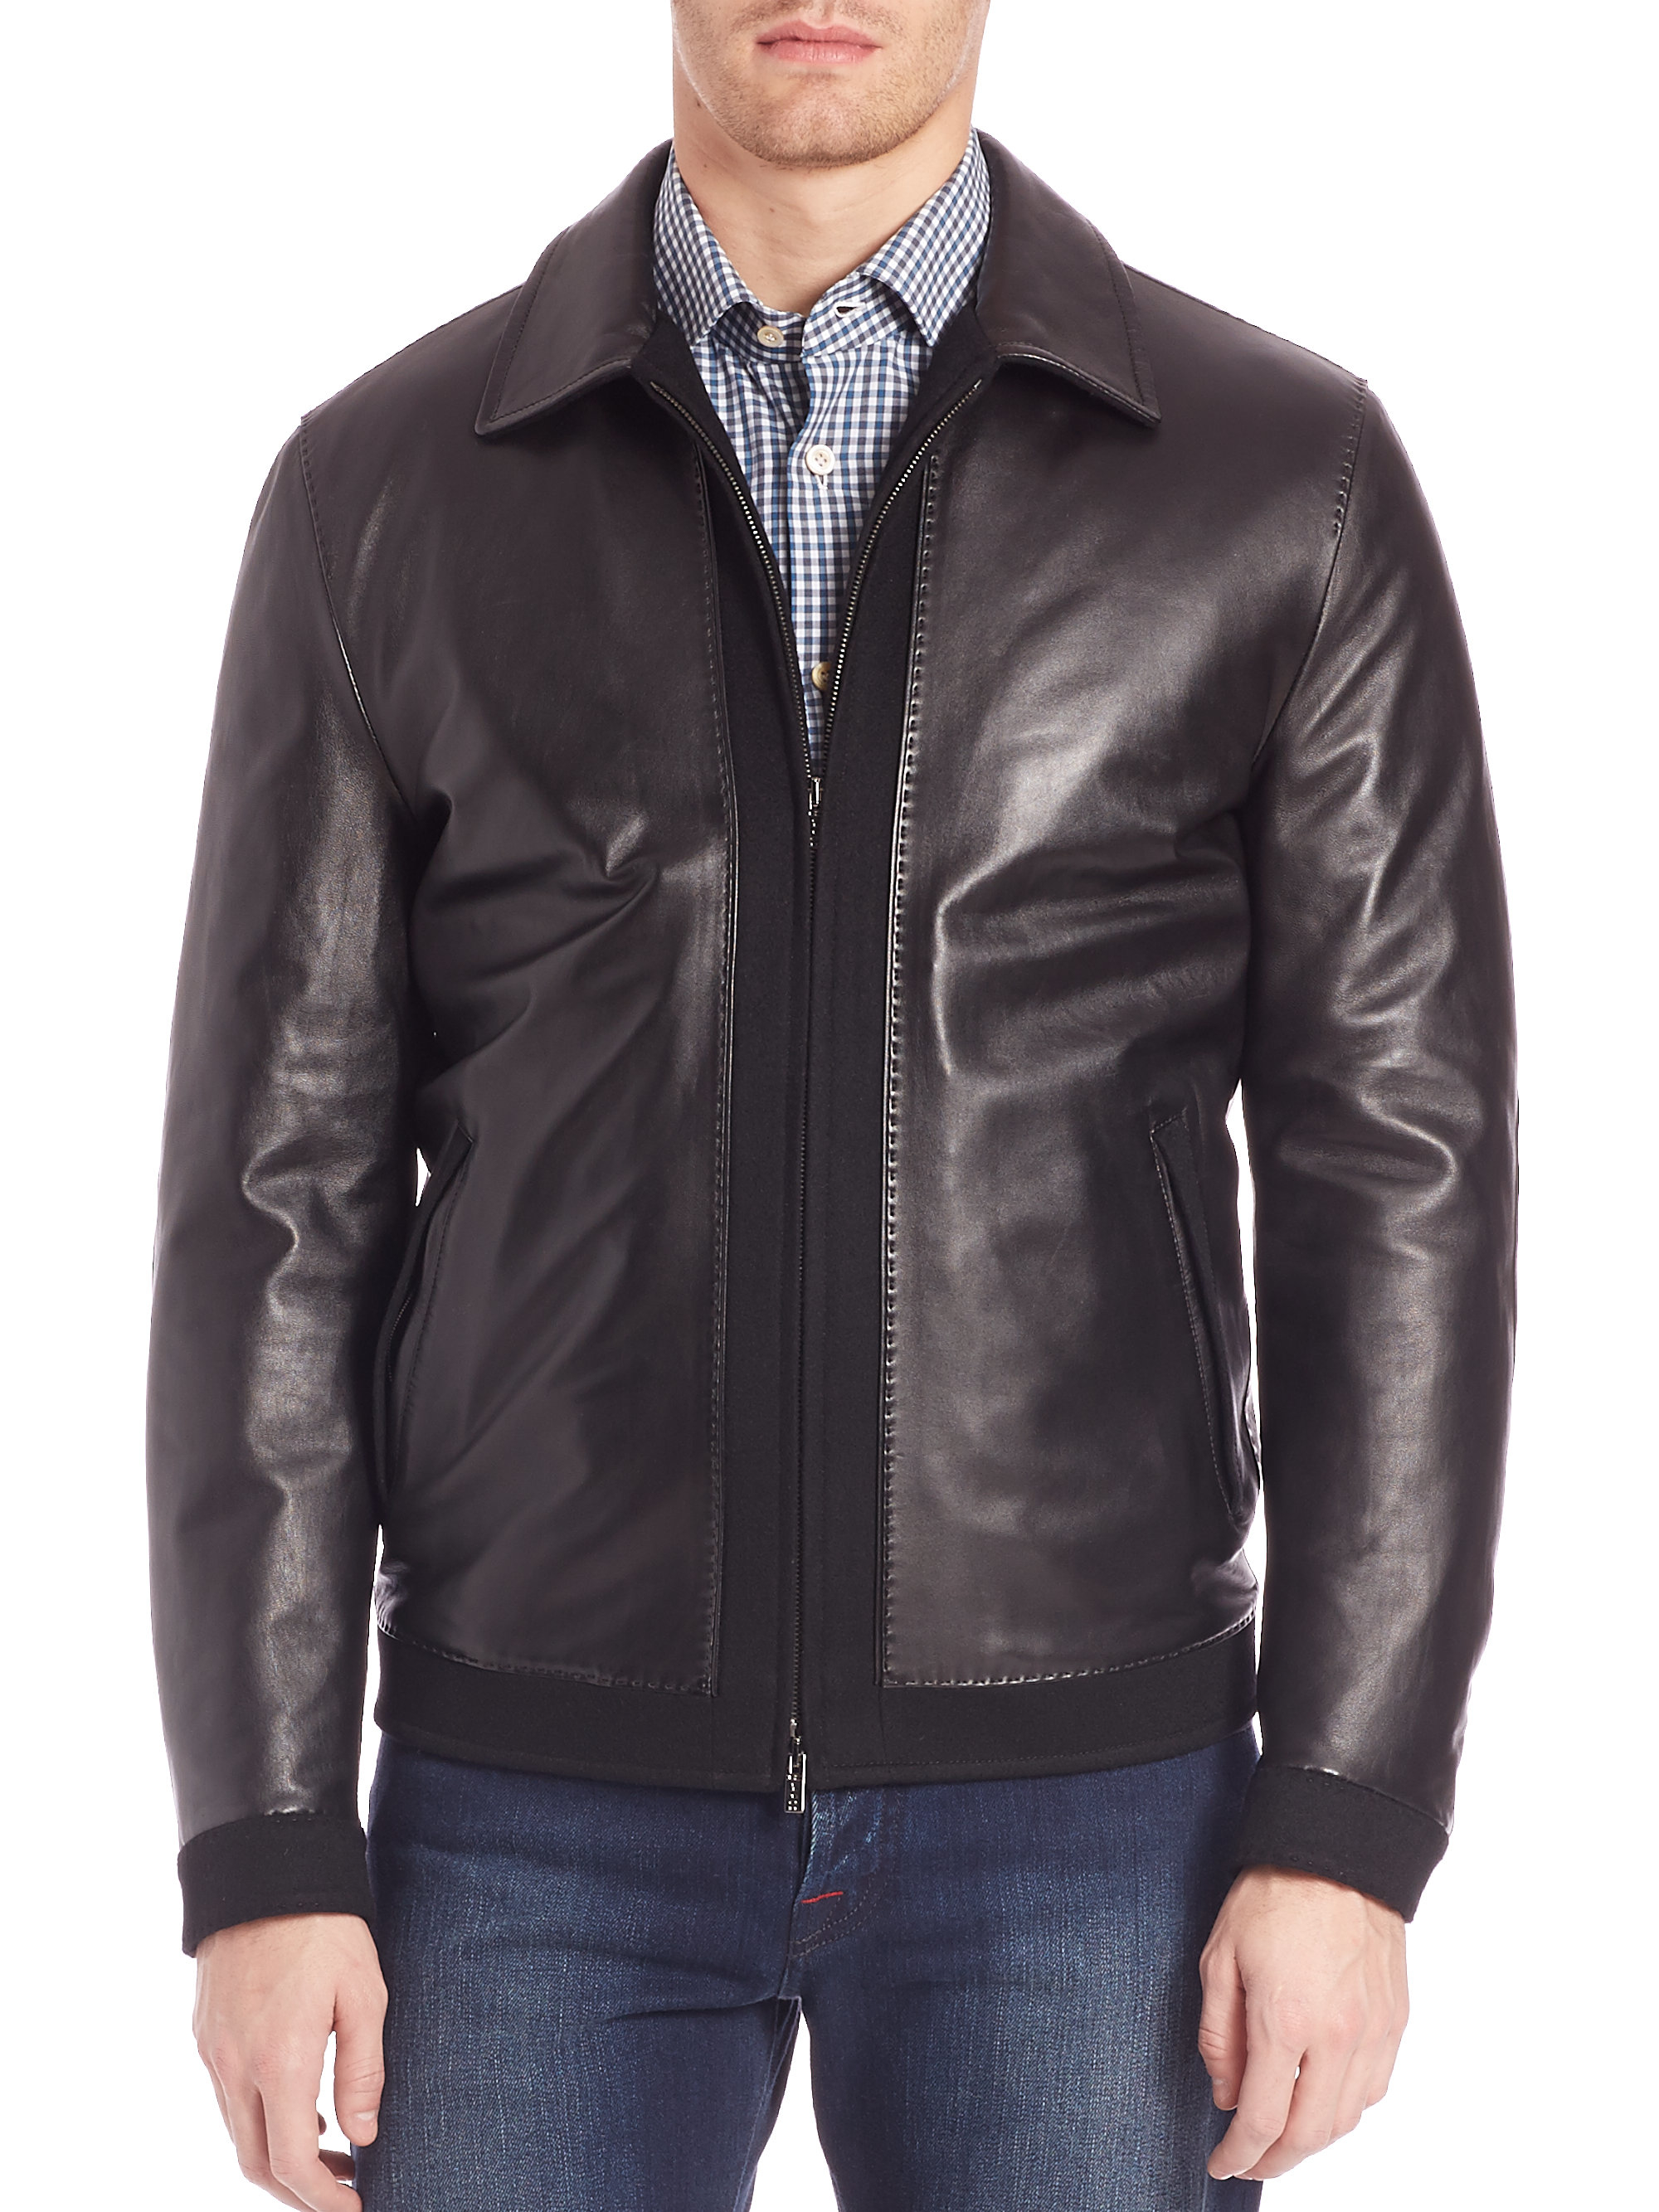 Lyst - Kiton Mixed-media Leather Bomber Jacket in Black for Men